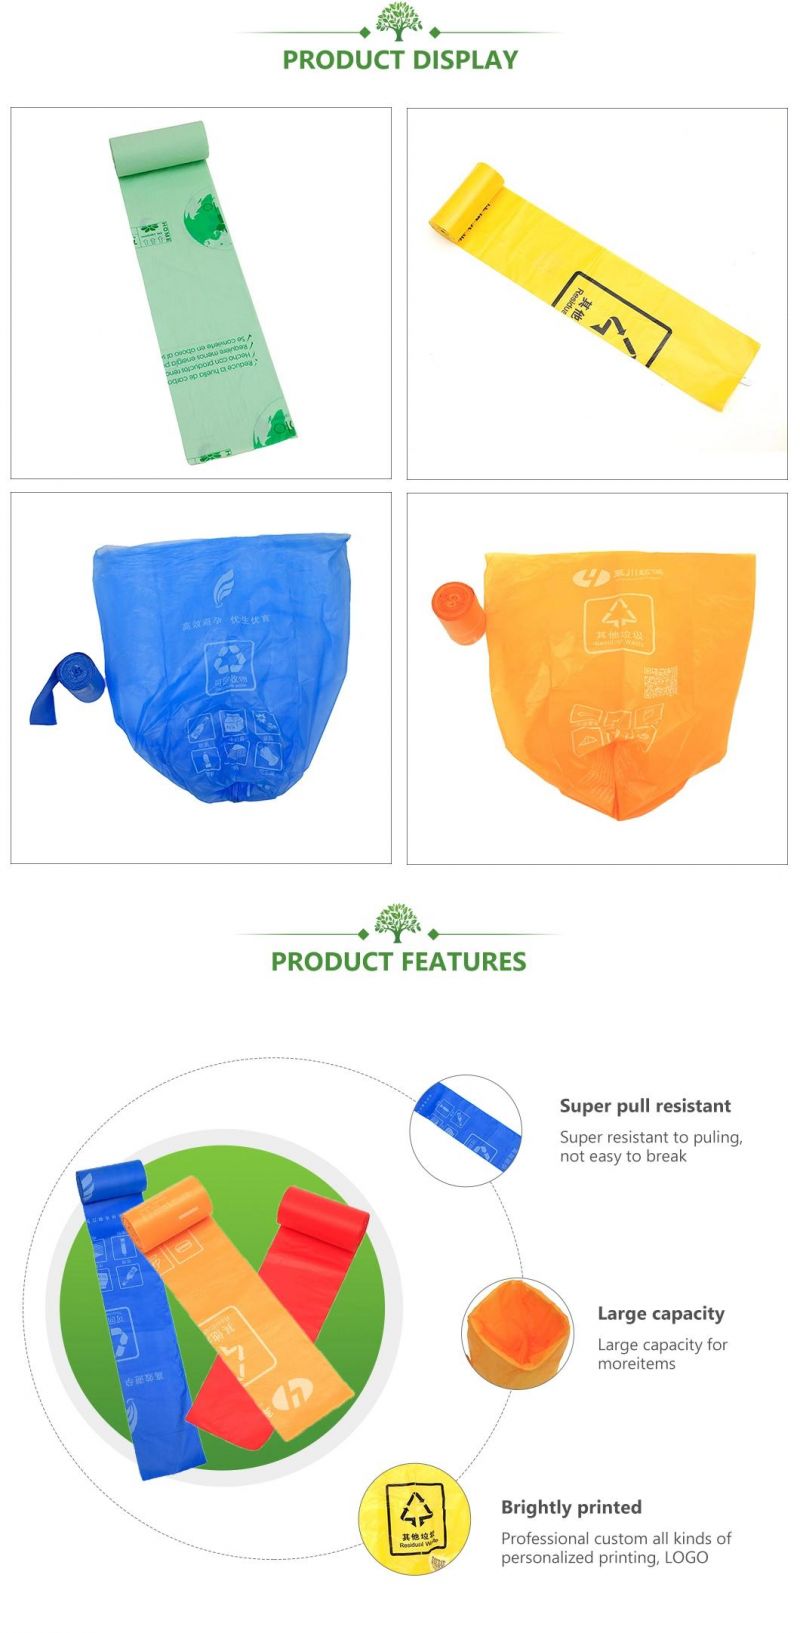 China 100% Biodegradable Bags Compostable Waste Garbage Bags Manufacturer/Supplier/Wholesale/Factory